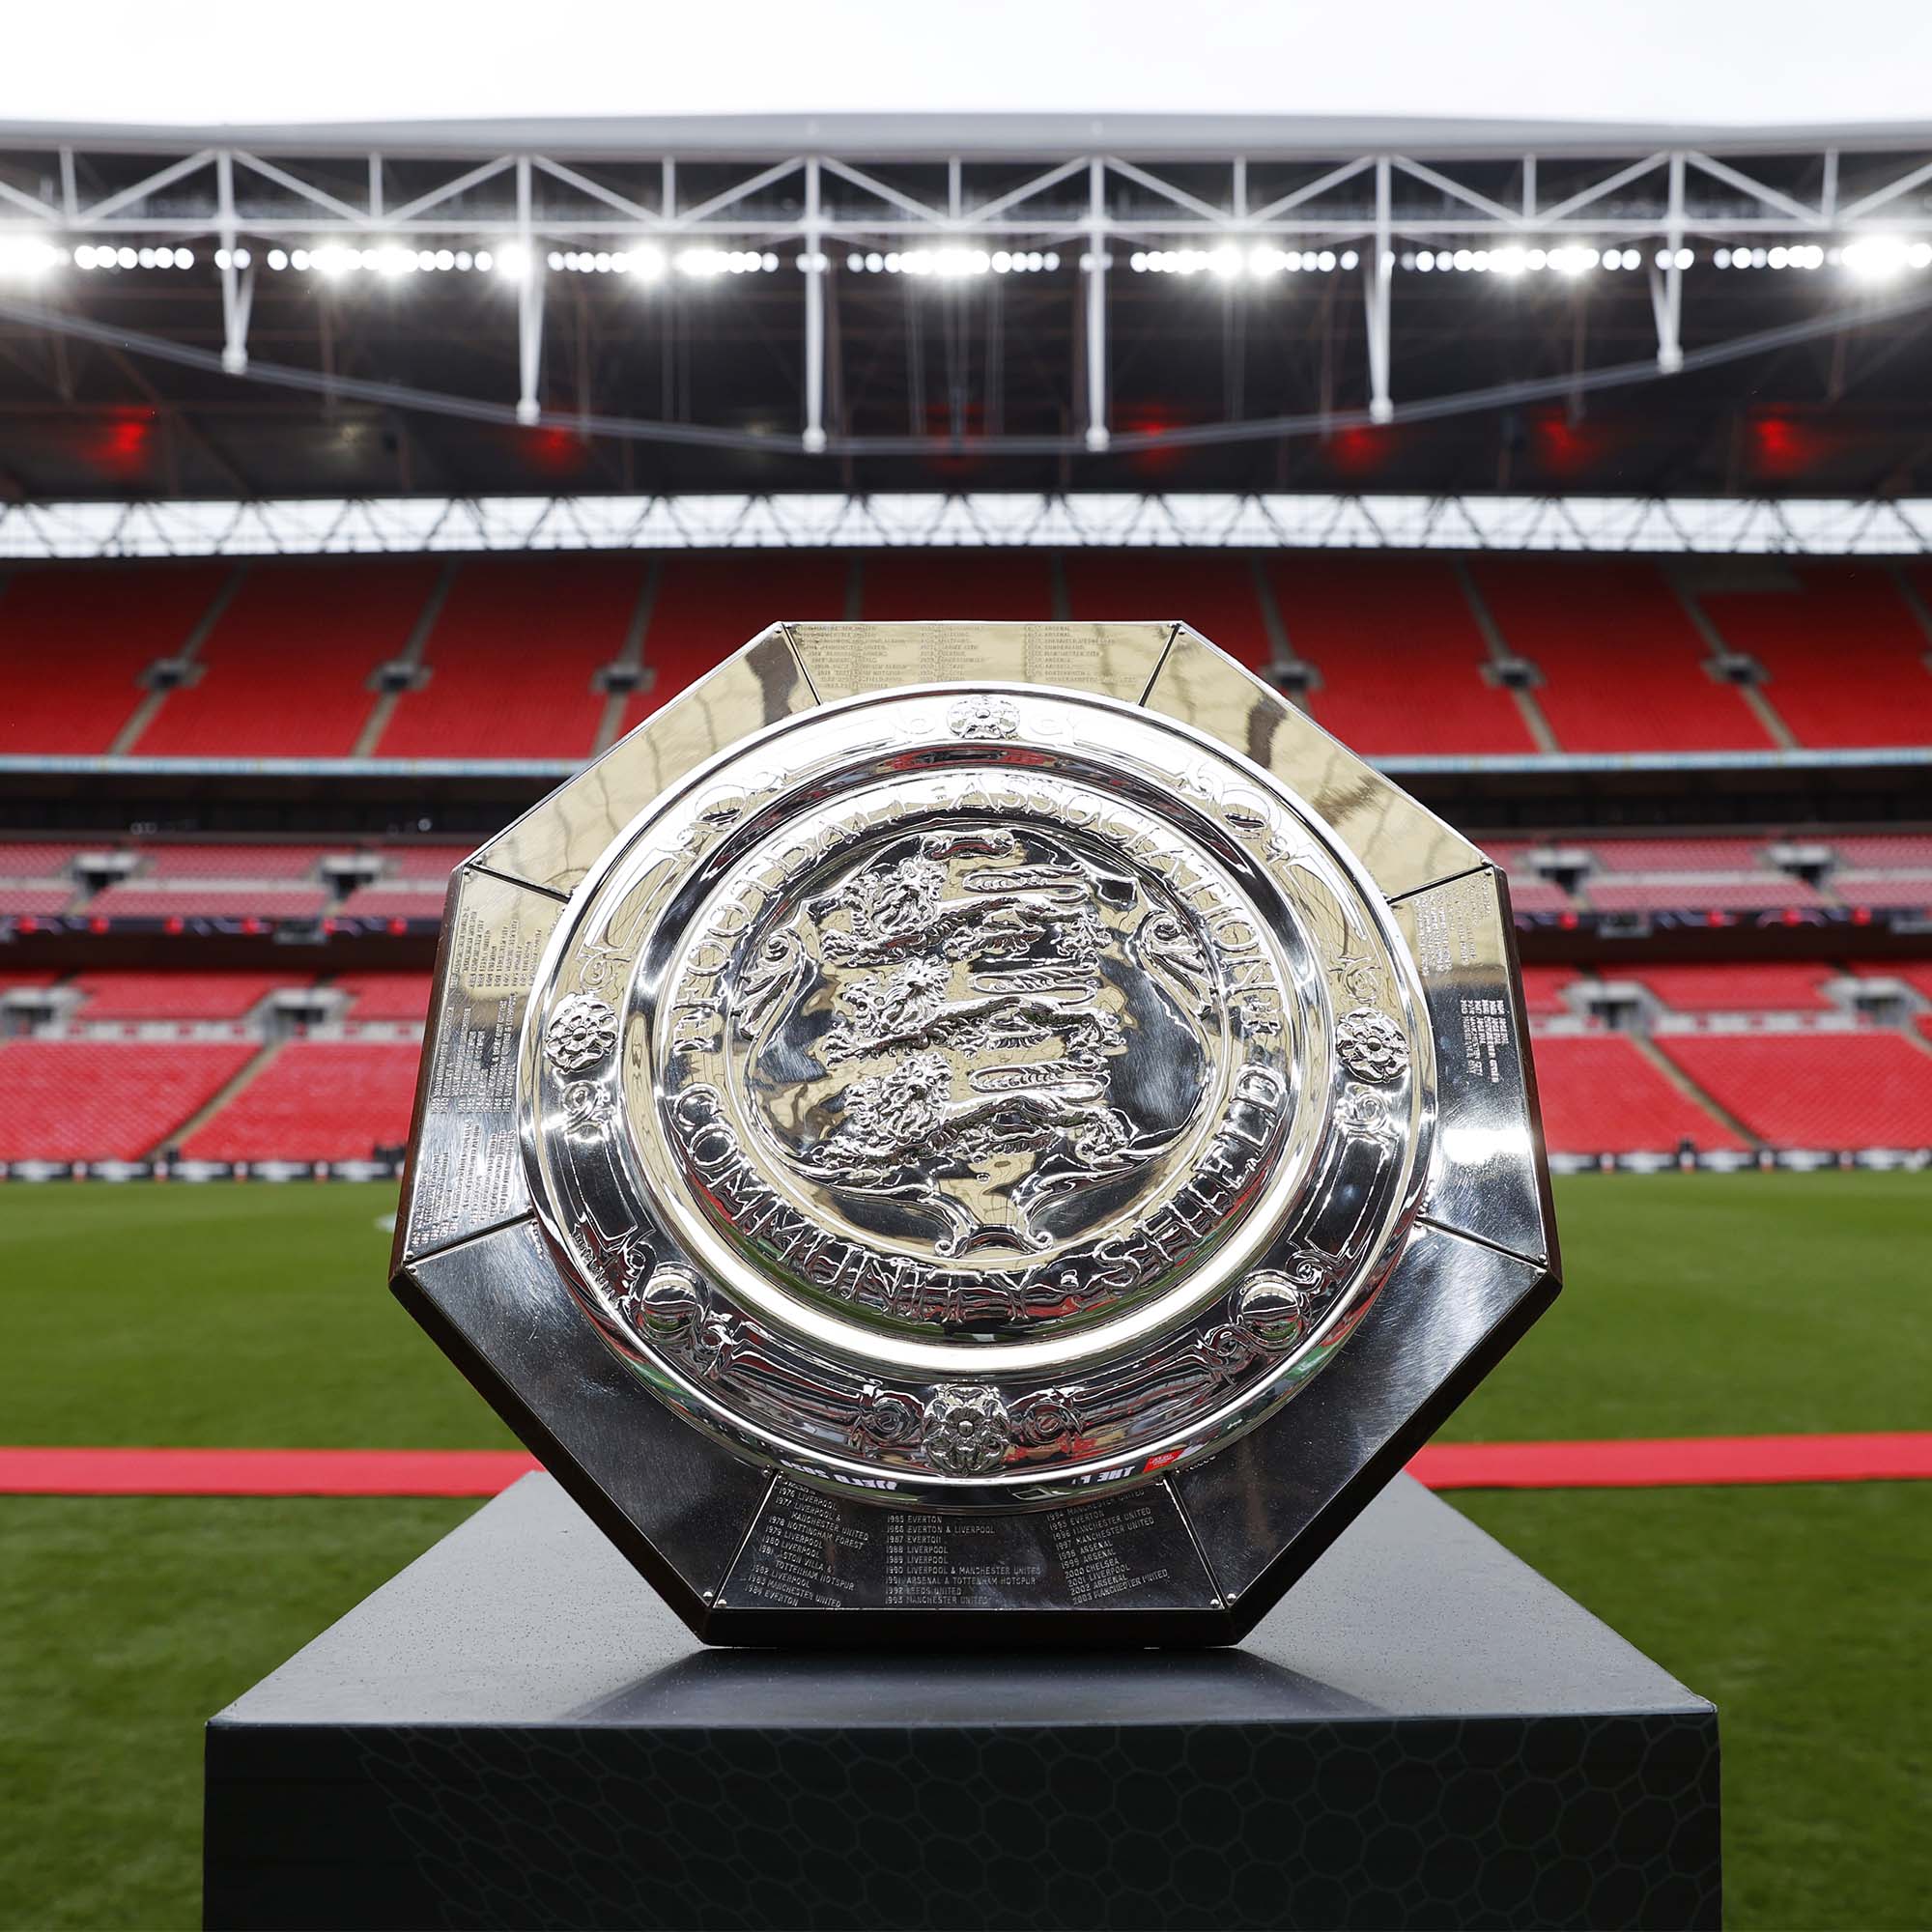 Makers of the FA Community Shield and Charity Shield Thomas Lyte